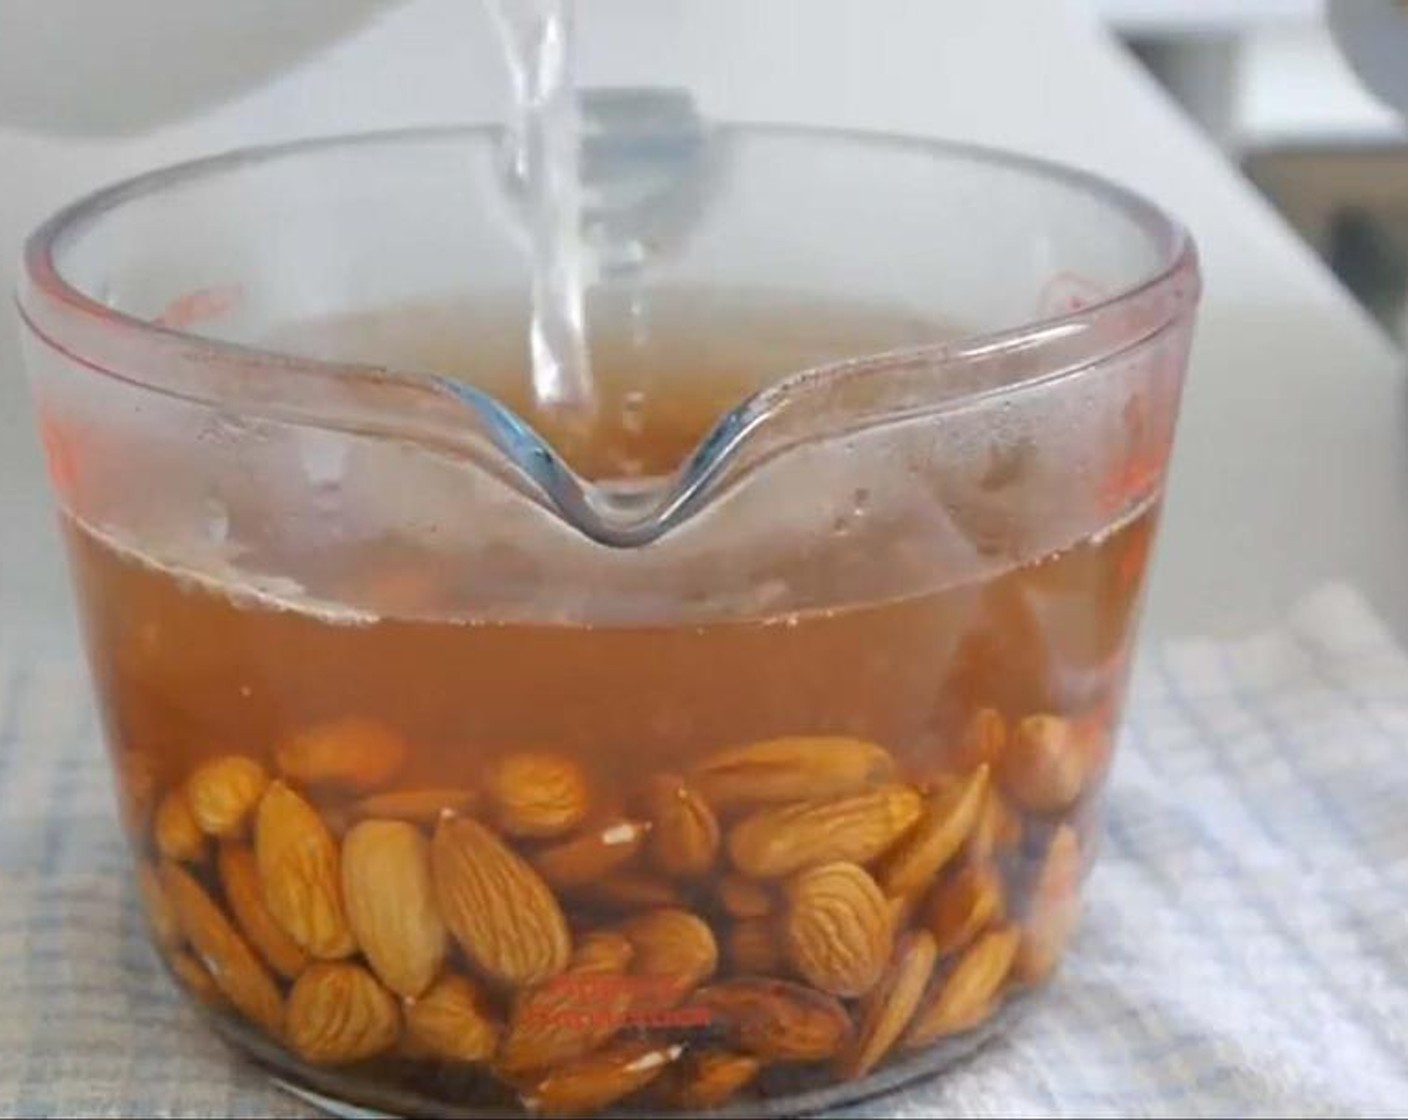 step 1 Add the Almonds (2 cups) to a container. Then add Water (to taste) until all almonds are completely covered and soak for 10 minutes.